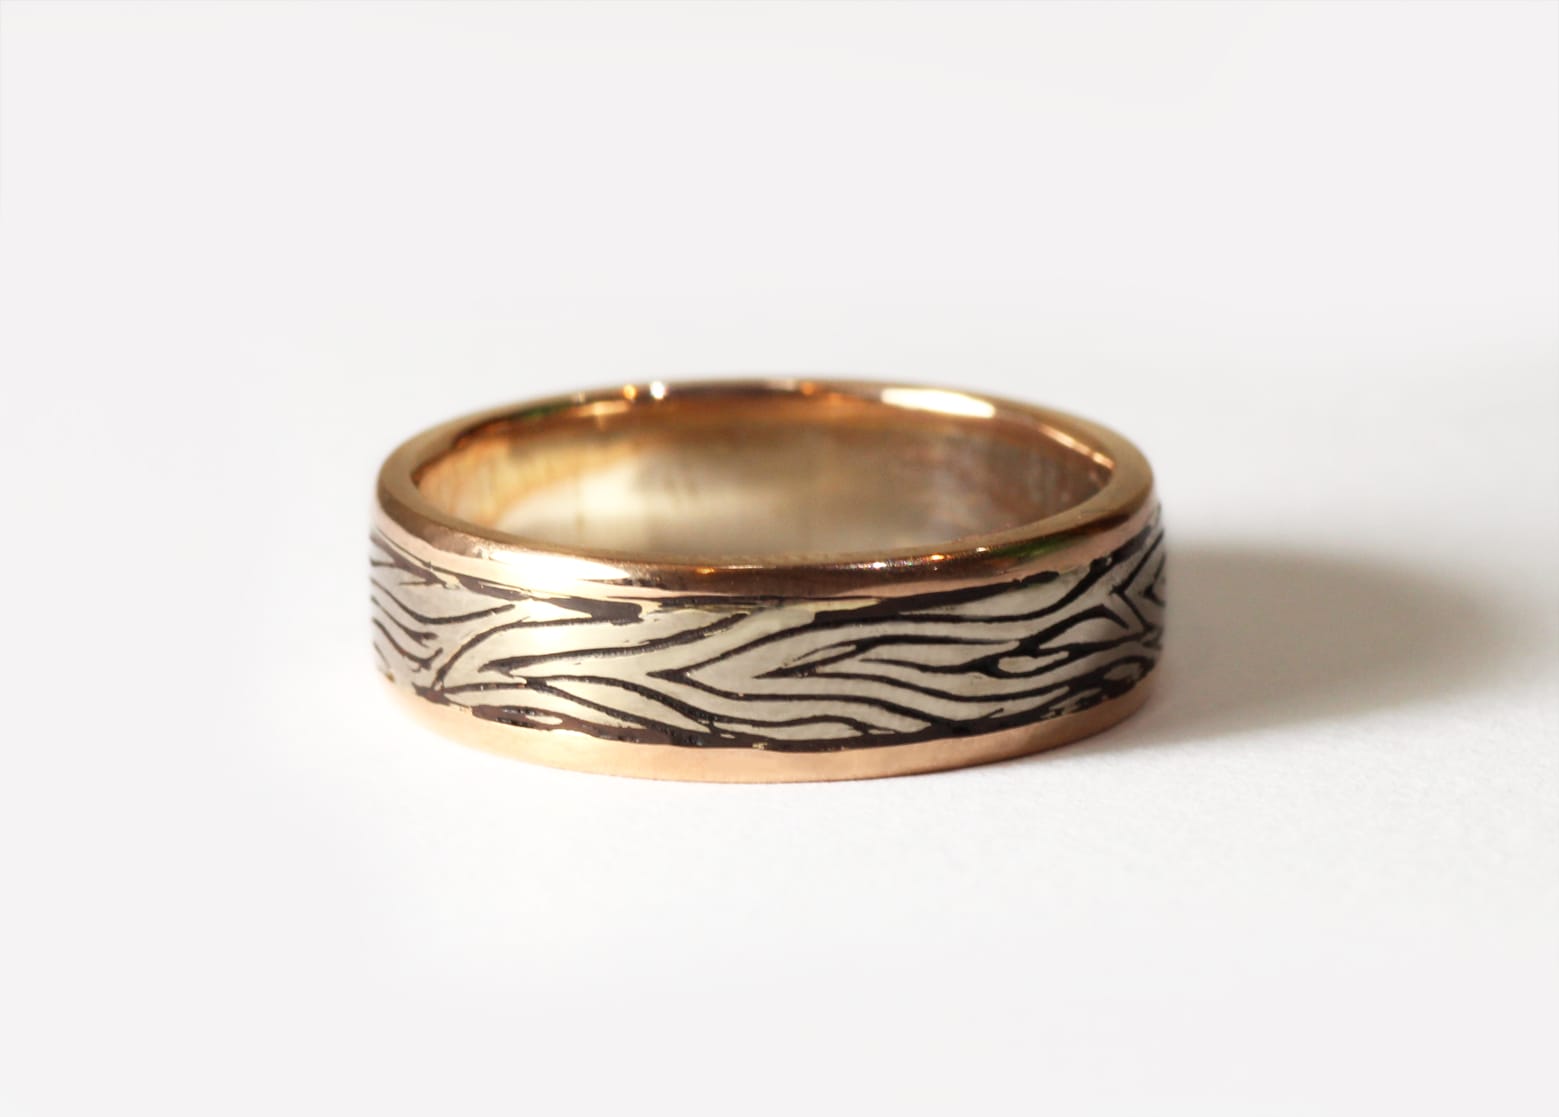 18ct Fairtrade gold 2 tone with wood grain finish